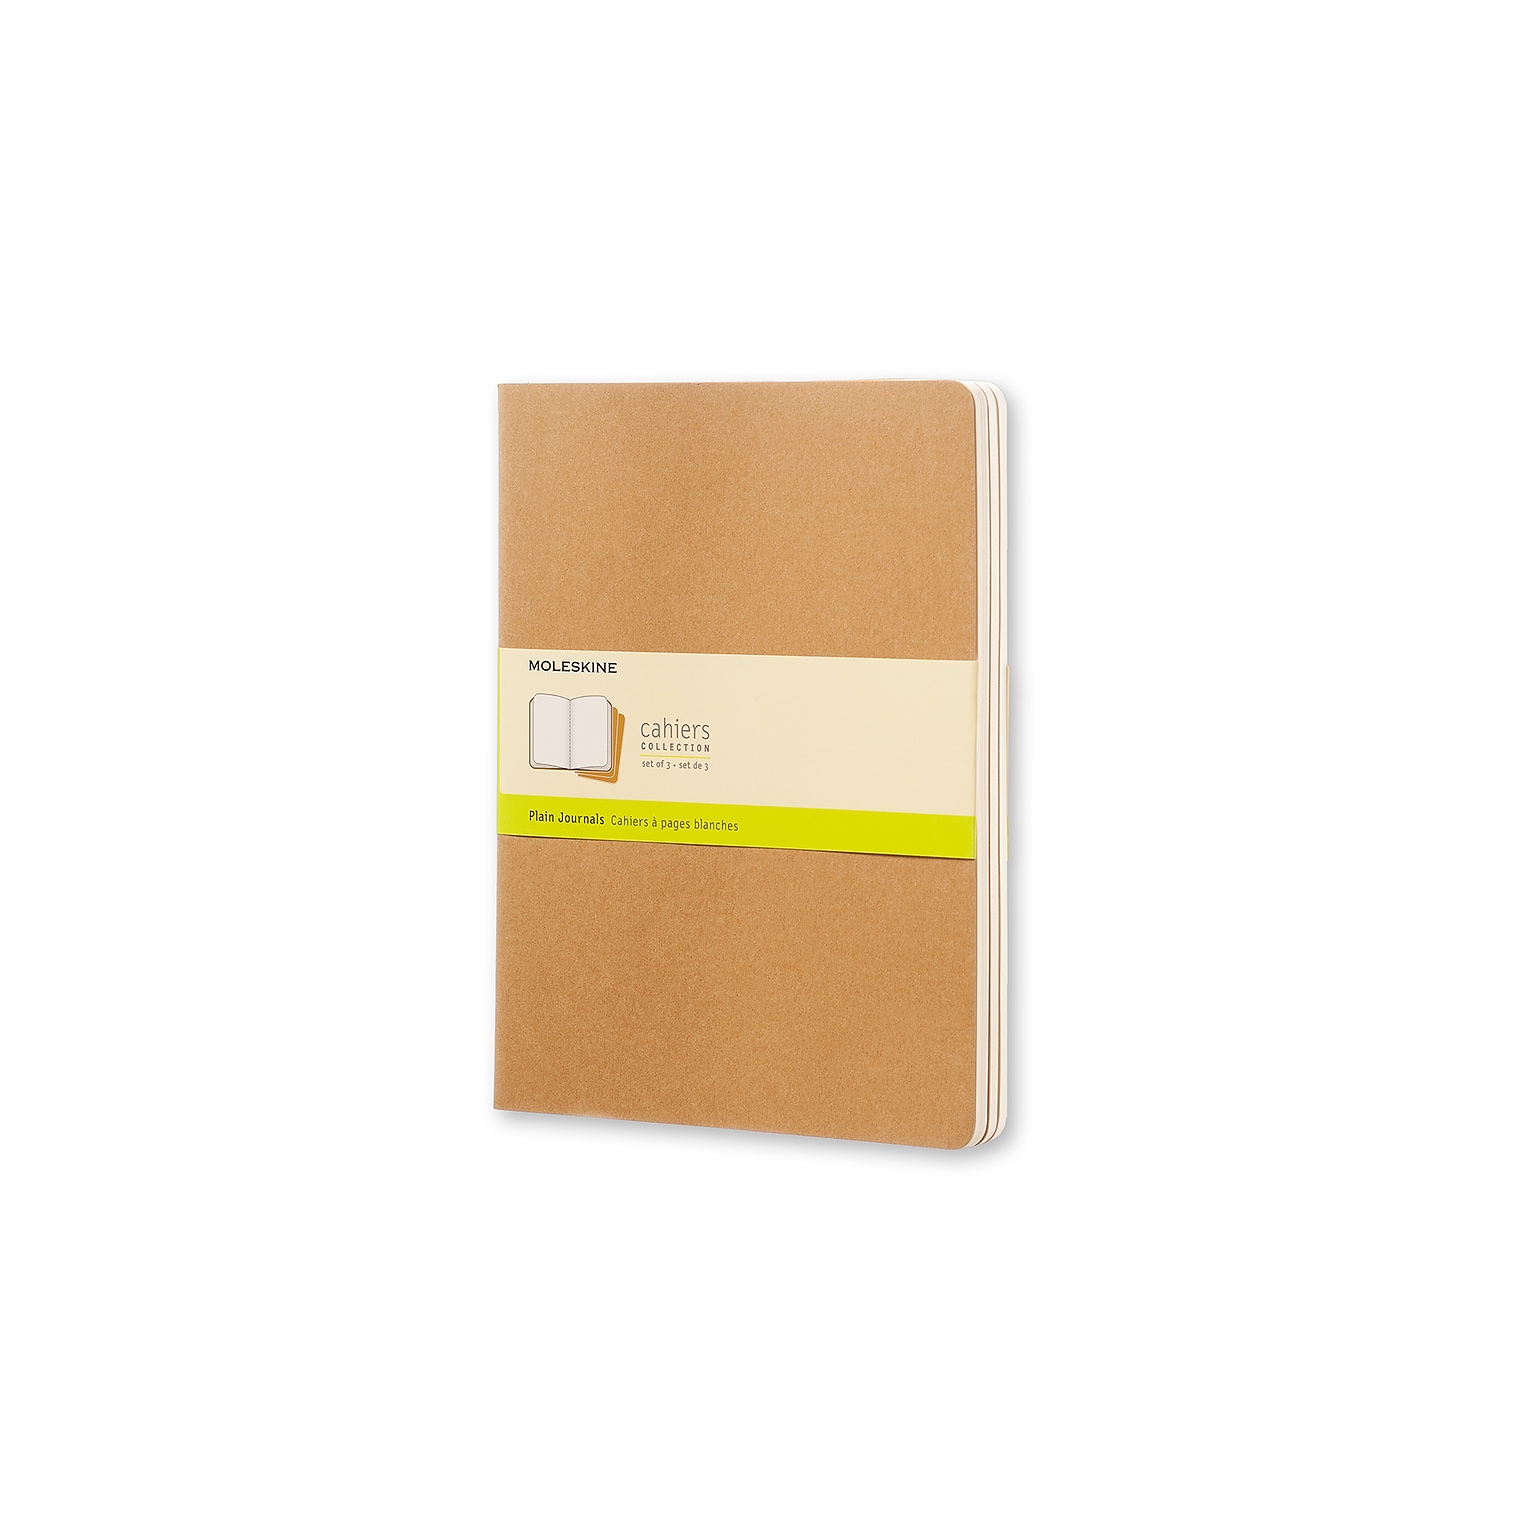 Moleskine Cahier Journal, 7.5 x 9.75, Brown, 120 Pages, 3/Pack (43195-PK3)